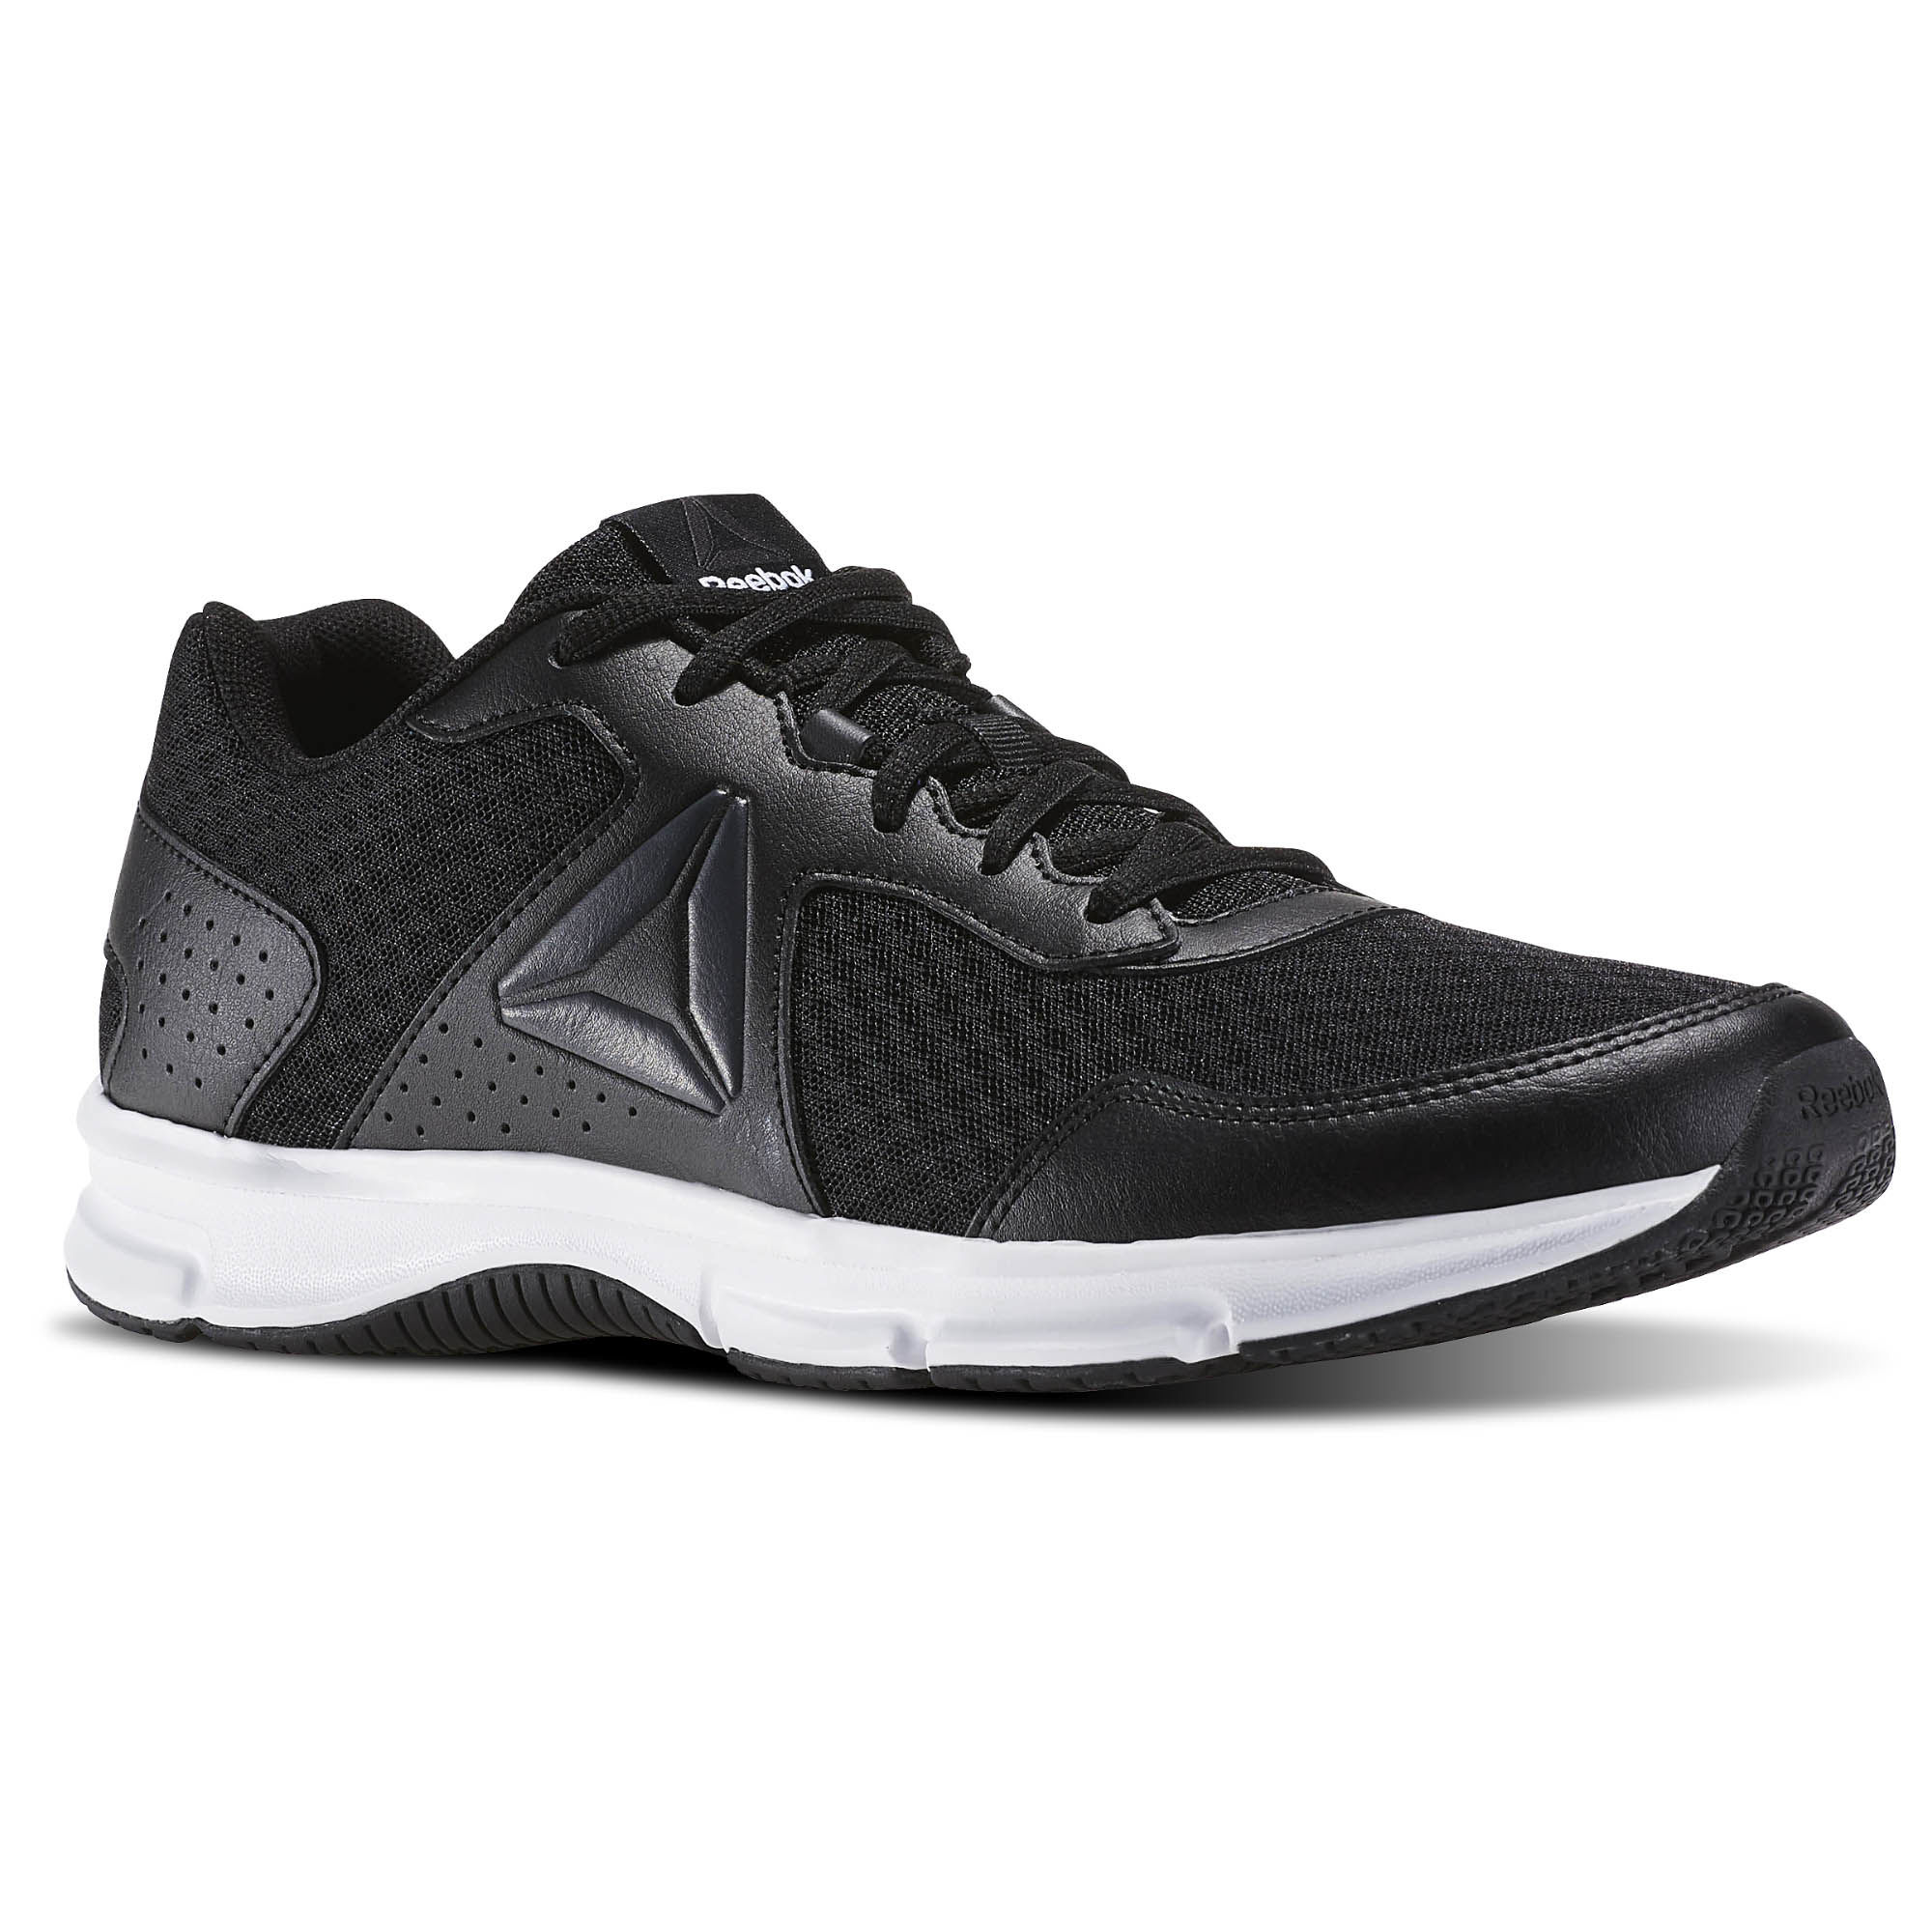 Select Reebok running shoes for $30 with code, free shipping